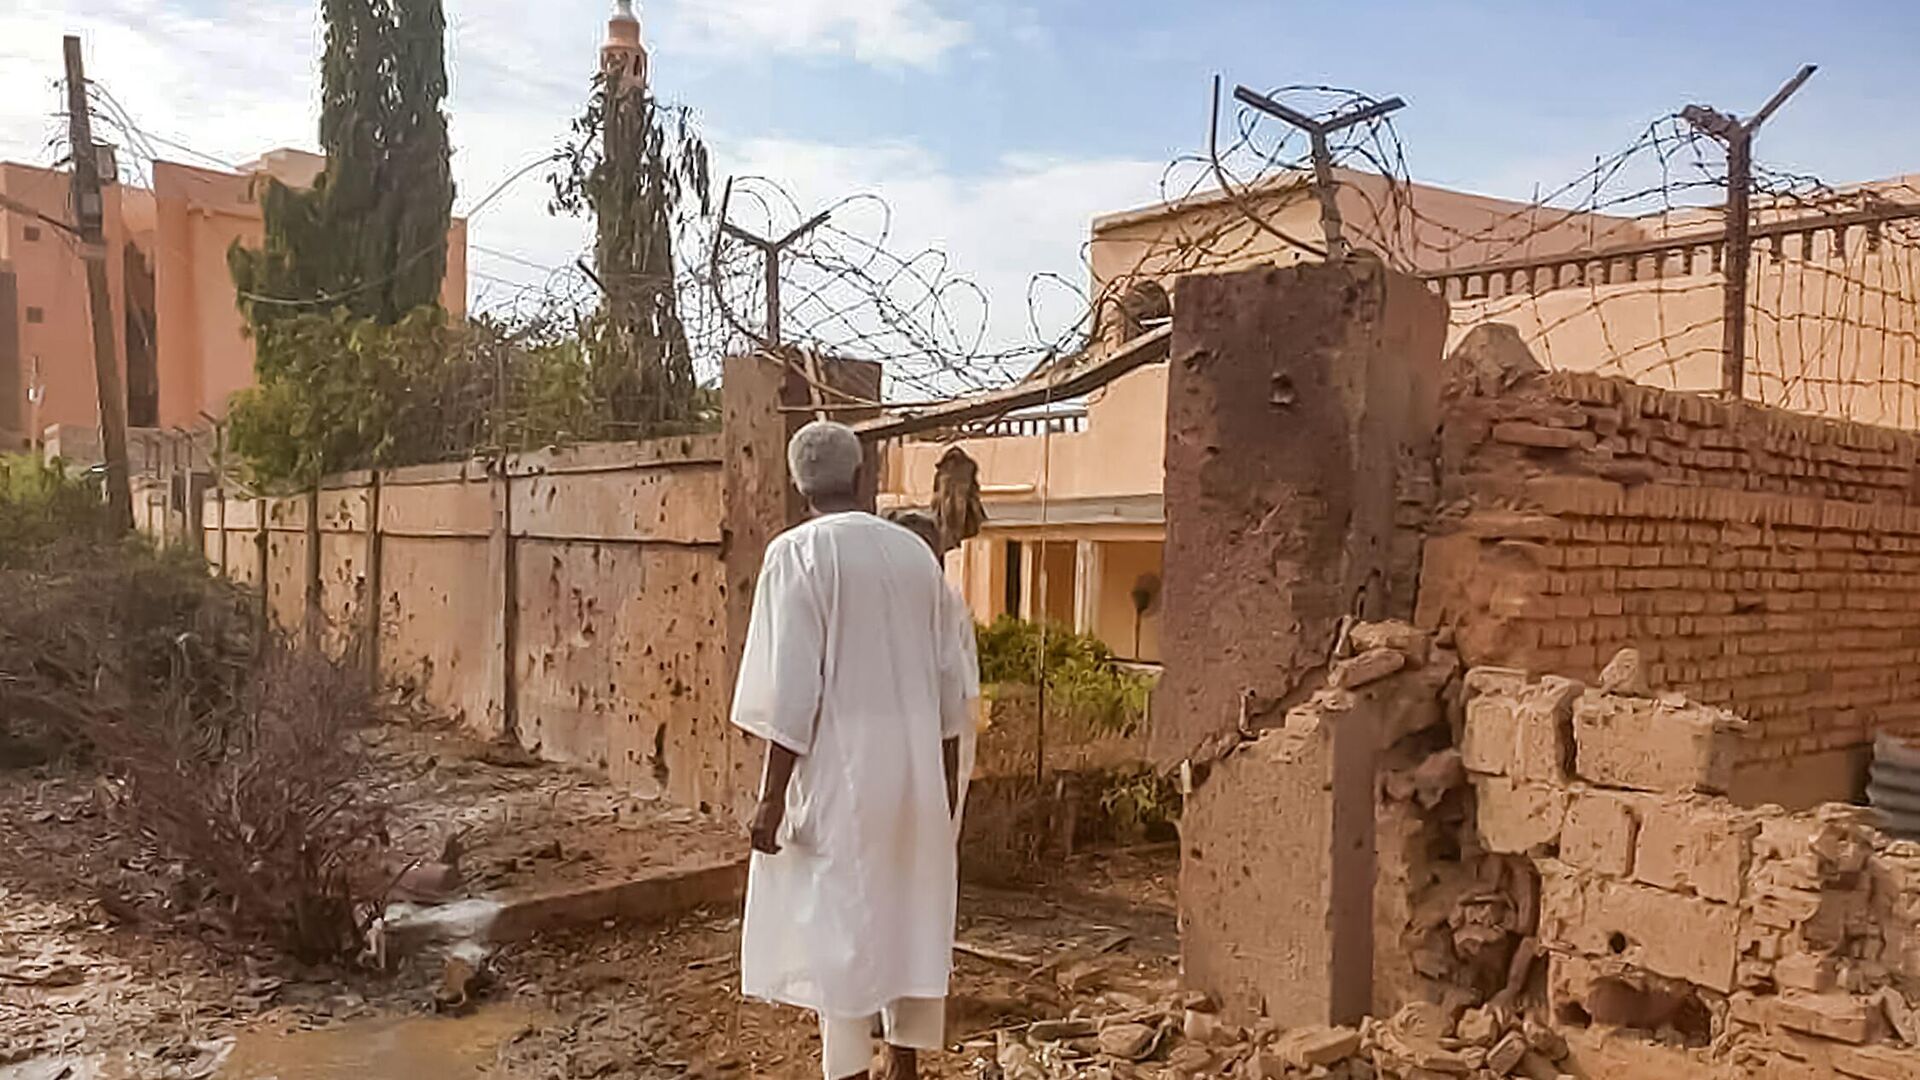 A man walks through rubble by a bullet-riddled fence with barbed-wire, in the aftermath of clashes and bombardment in the Ombada suburb on the western outskirts of Omdurman, the twin-city of Sudan's capital, on July 4, 2023. - Sputnik Africa, 1920, 21.11.2023